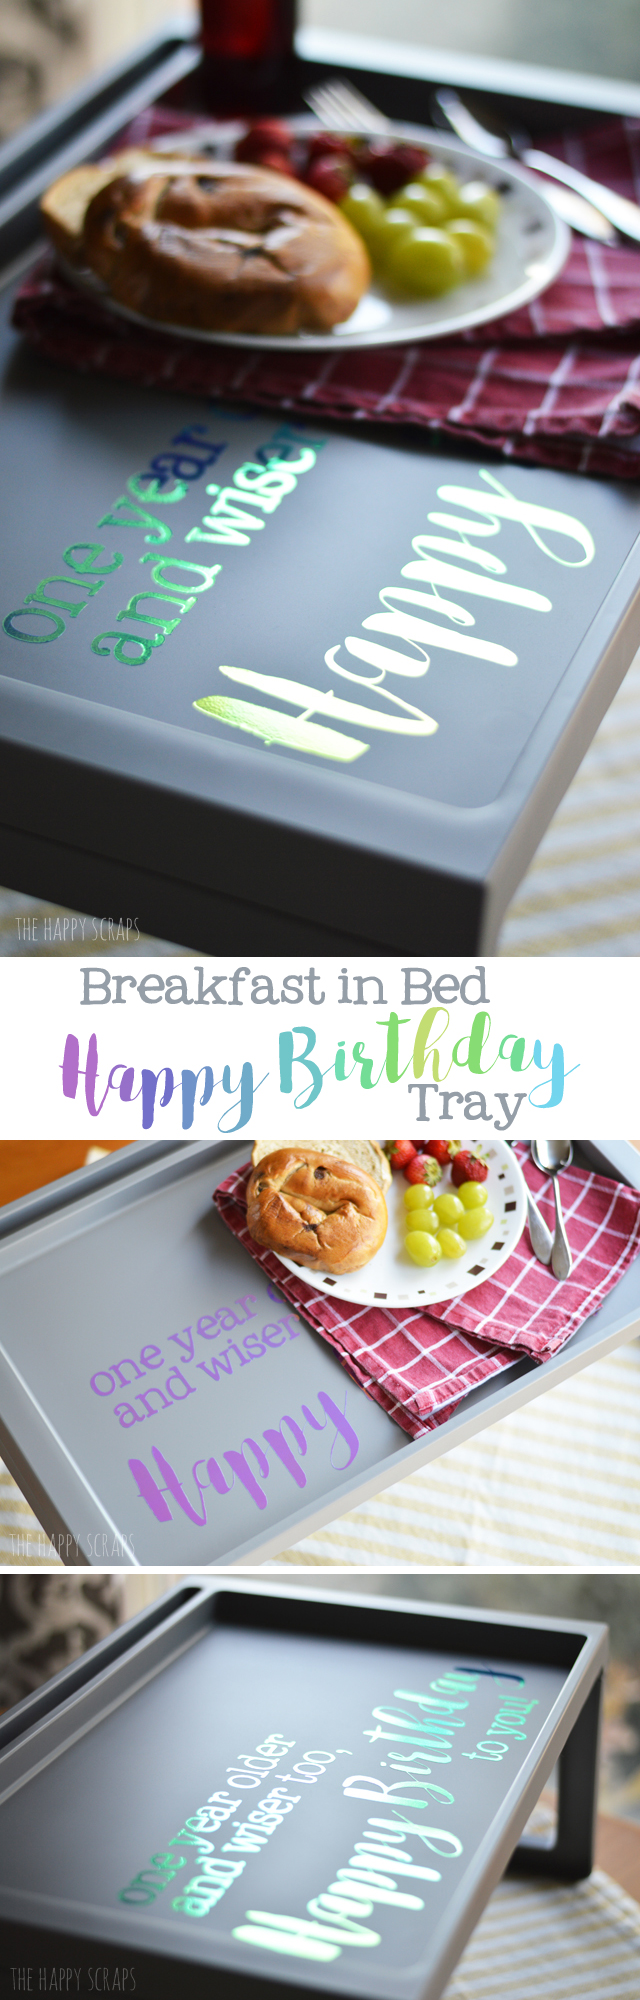 If you enjoy celebrating birthdays, then you need to make a Breakfast in Bed Happy Birthday Tray. Your family will love the new tradition!